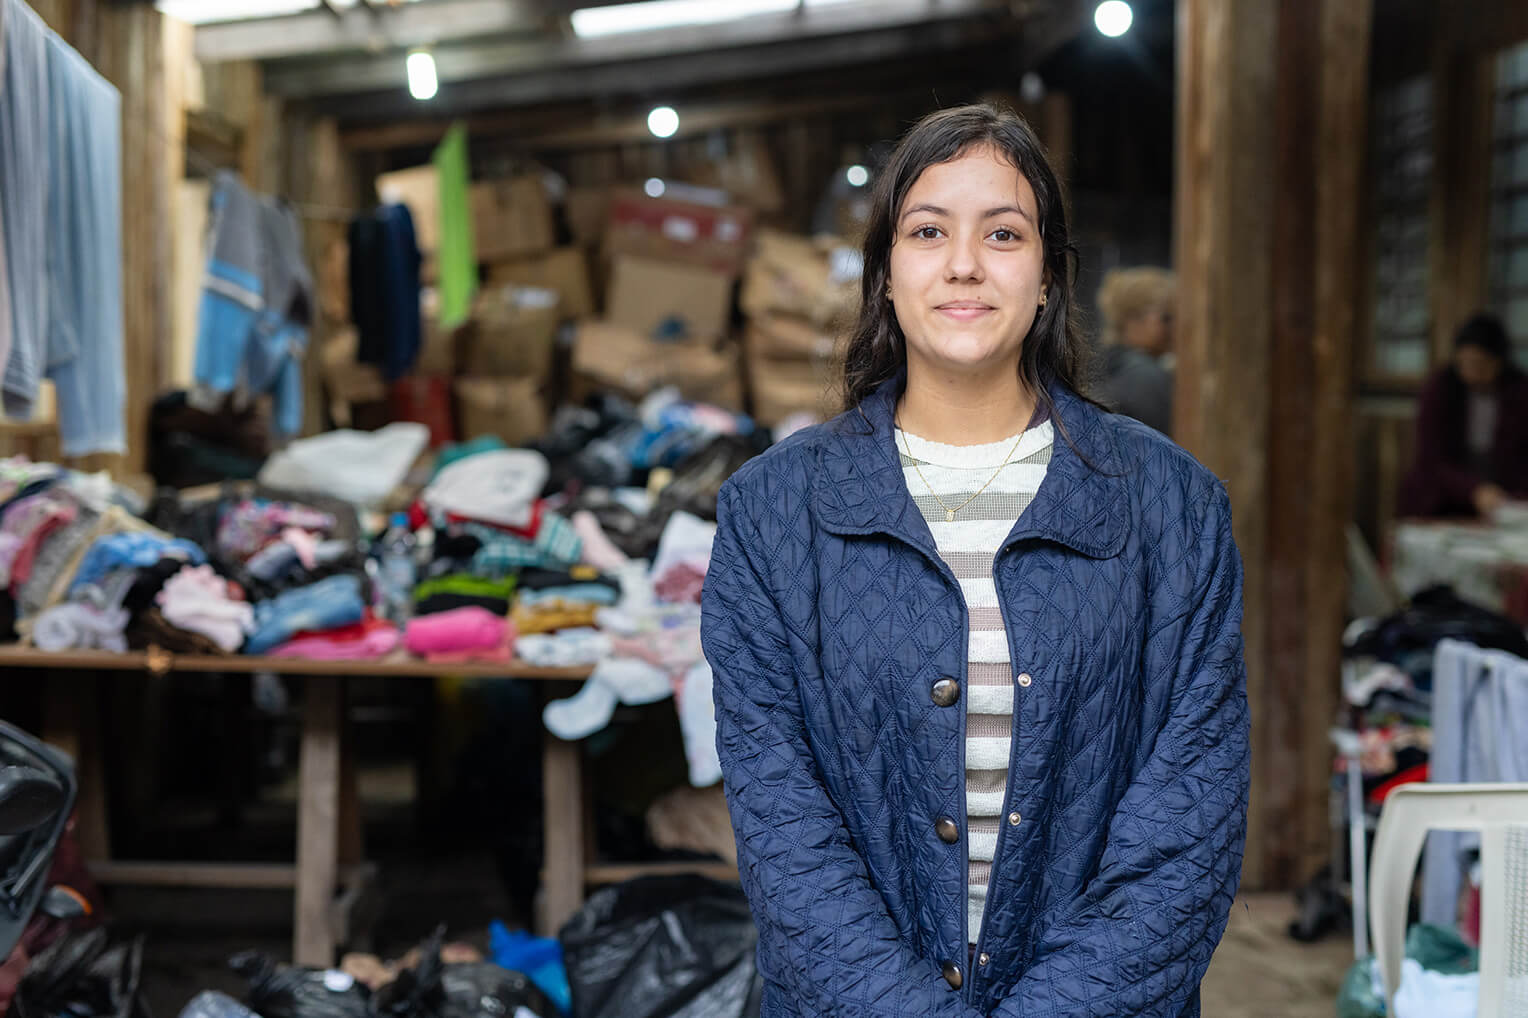 Mariana has never seen floods like this in her hometown. Still, she trusts God through it all. 